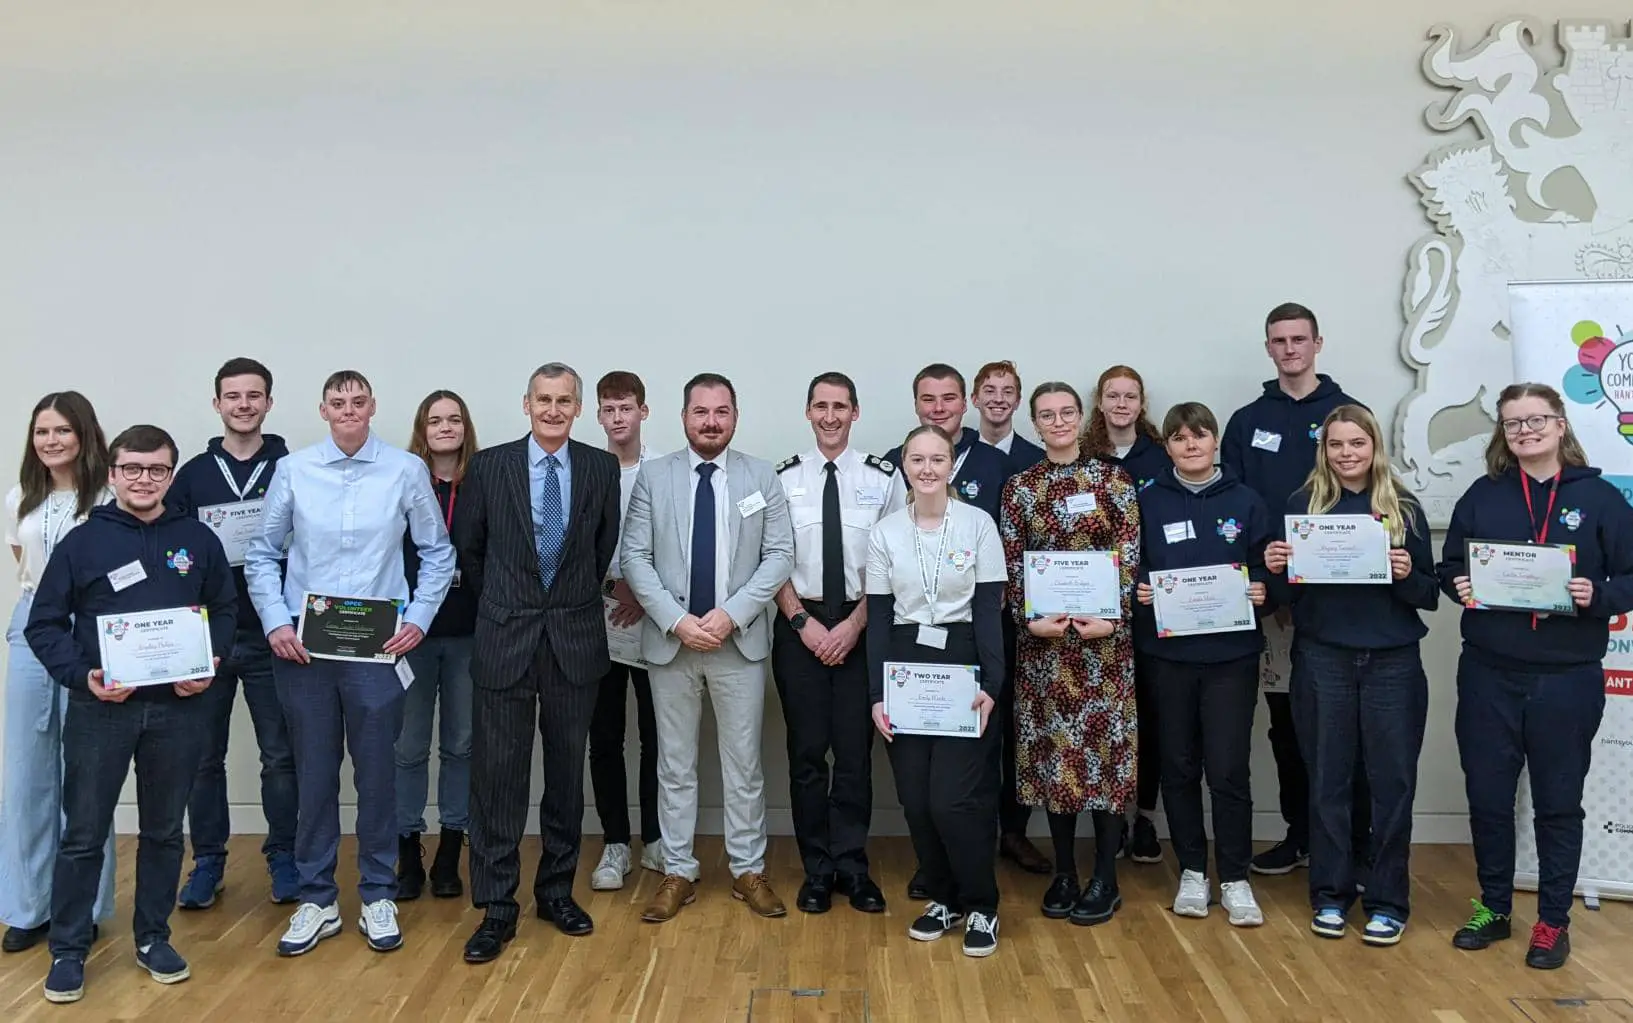 Members of the Youth Commission with (from left to right) with HM Lord-Lieutenant of Hampshire Nigel Atkinson, Deputy Police and Crime Commissioner Terry Norton, and Acting Chief Constable Ben Snuggs